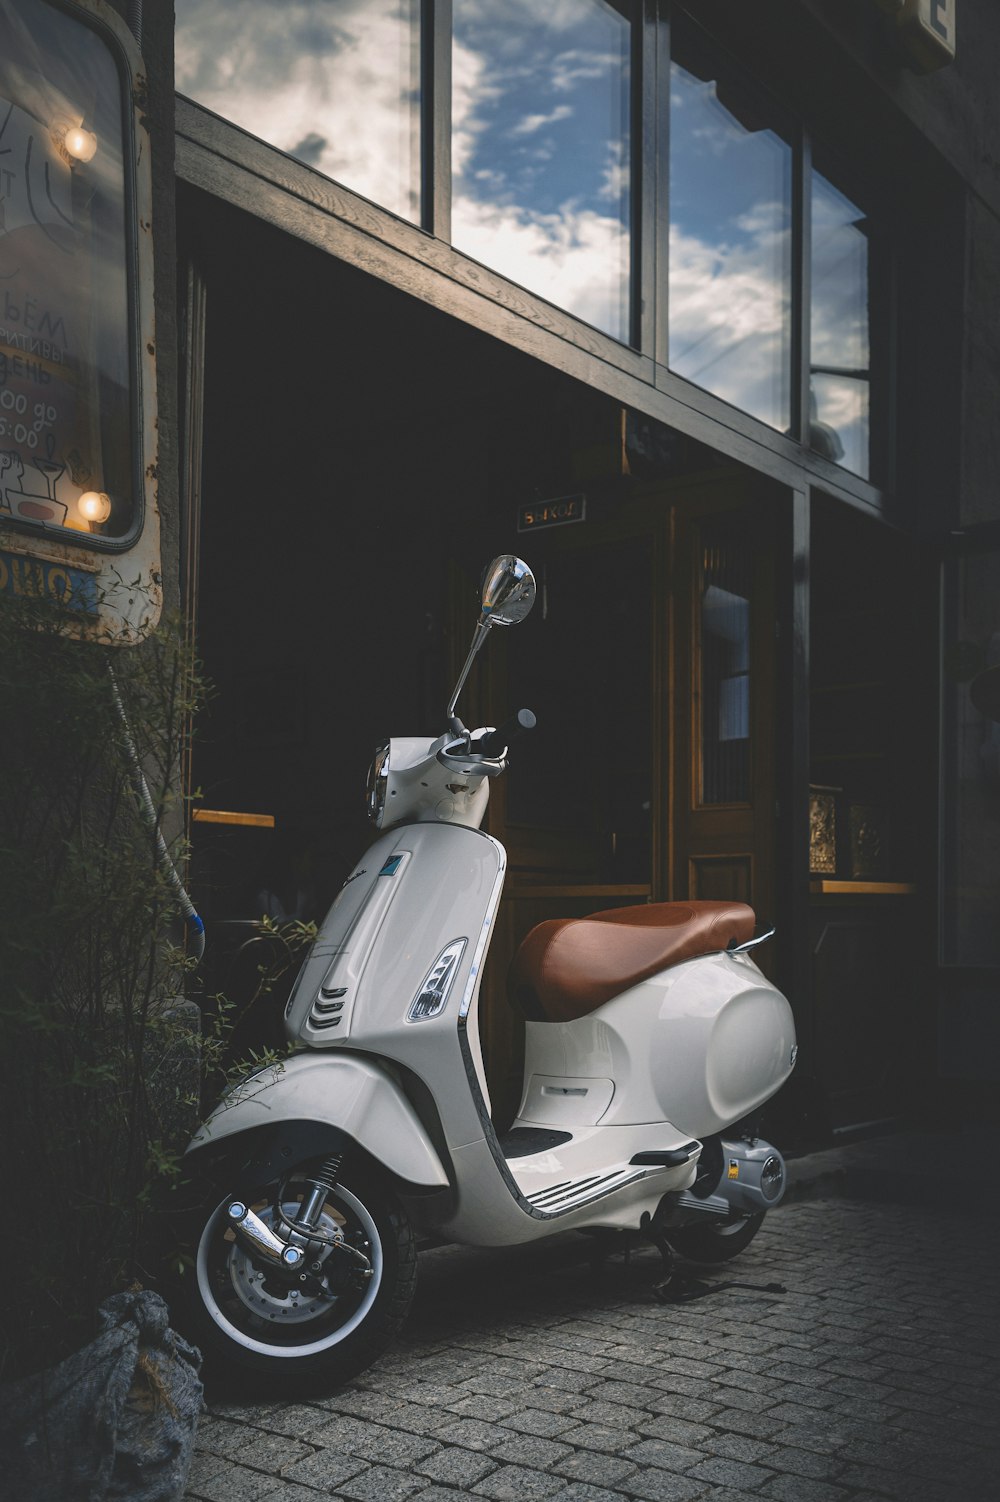 white motor scooter parked beside building during night time